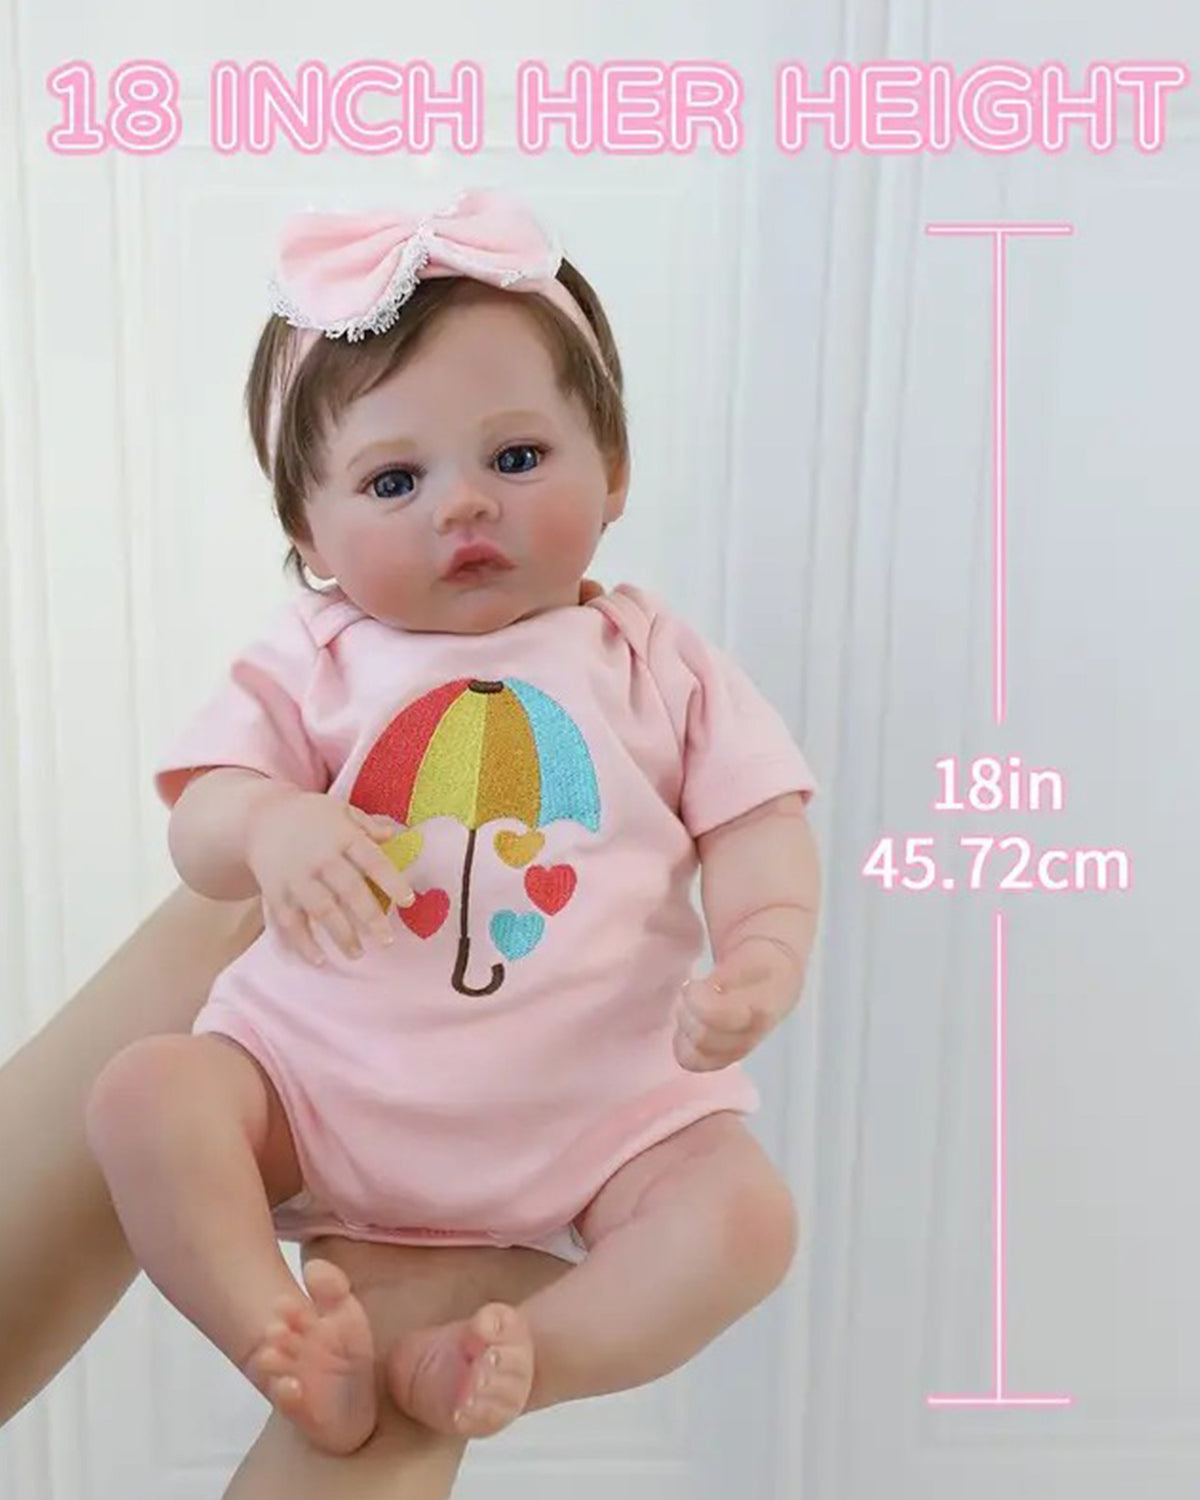 Adelaida - 18" Lifelike Reborn Baby Dolls Realistic Baby Dolls Newborn Girl Cloth Body Vinyl Limbs Gift or Toys Collection for Kids Age 3+